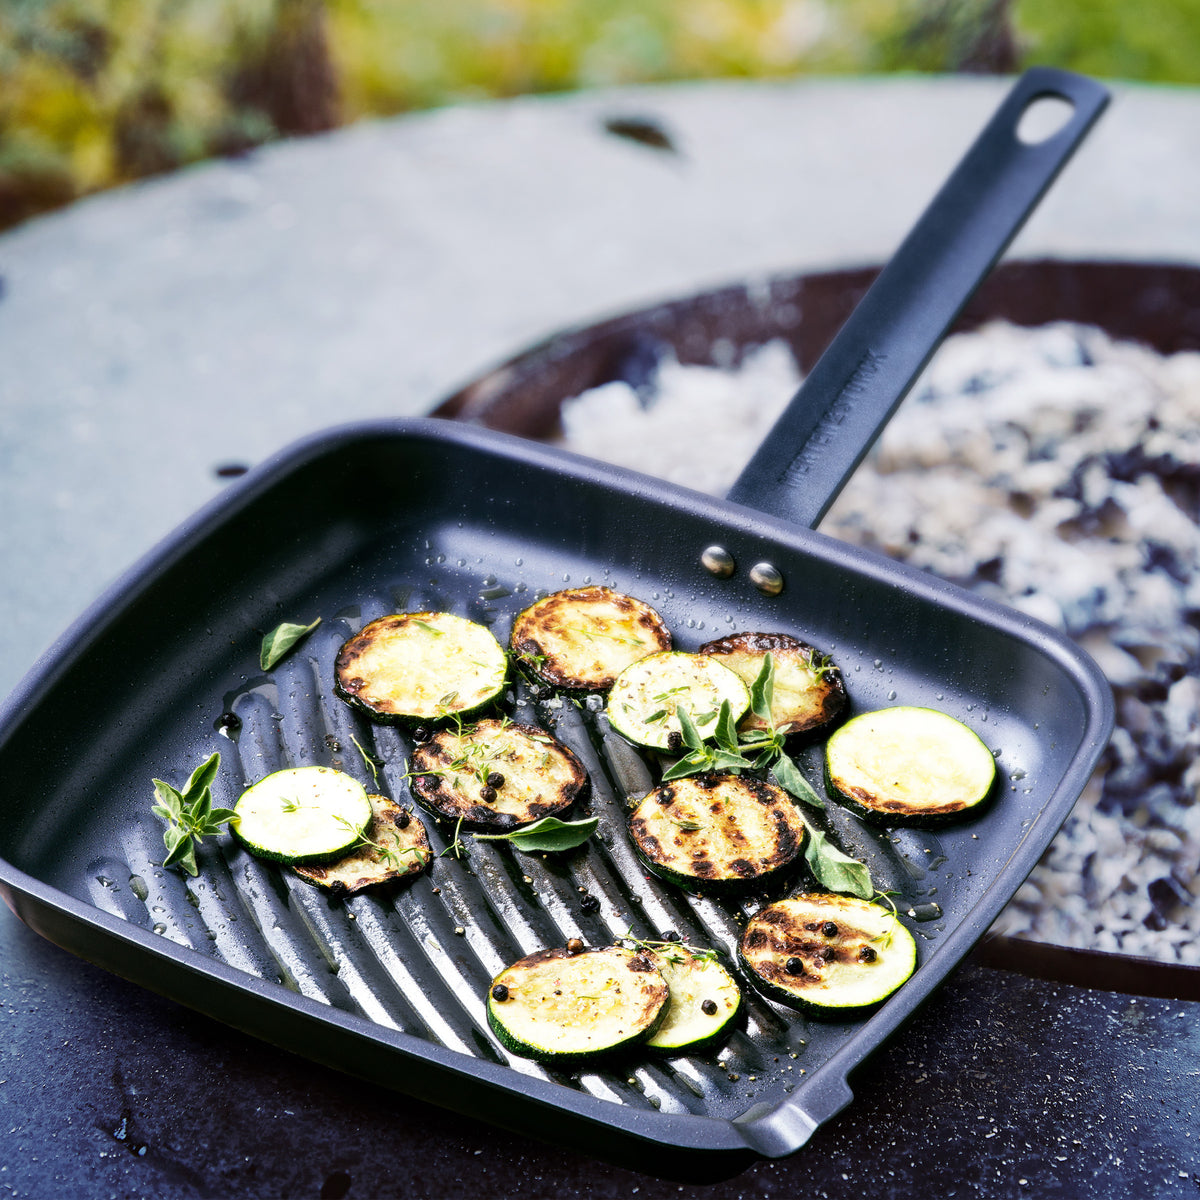 grill pan with grilled veggies in it set next to a fire.